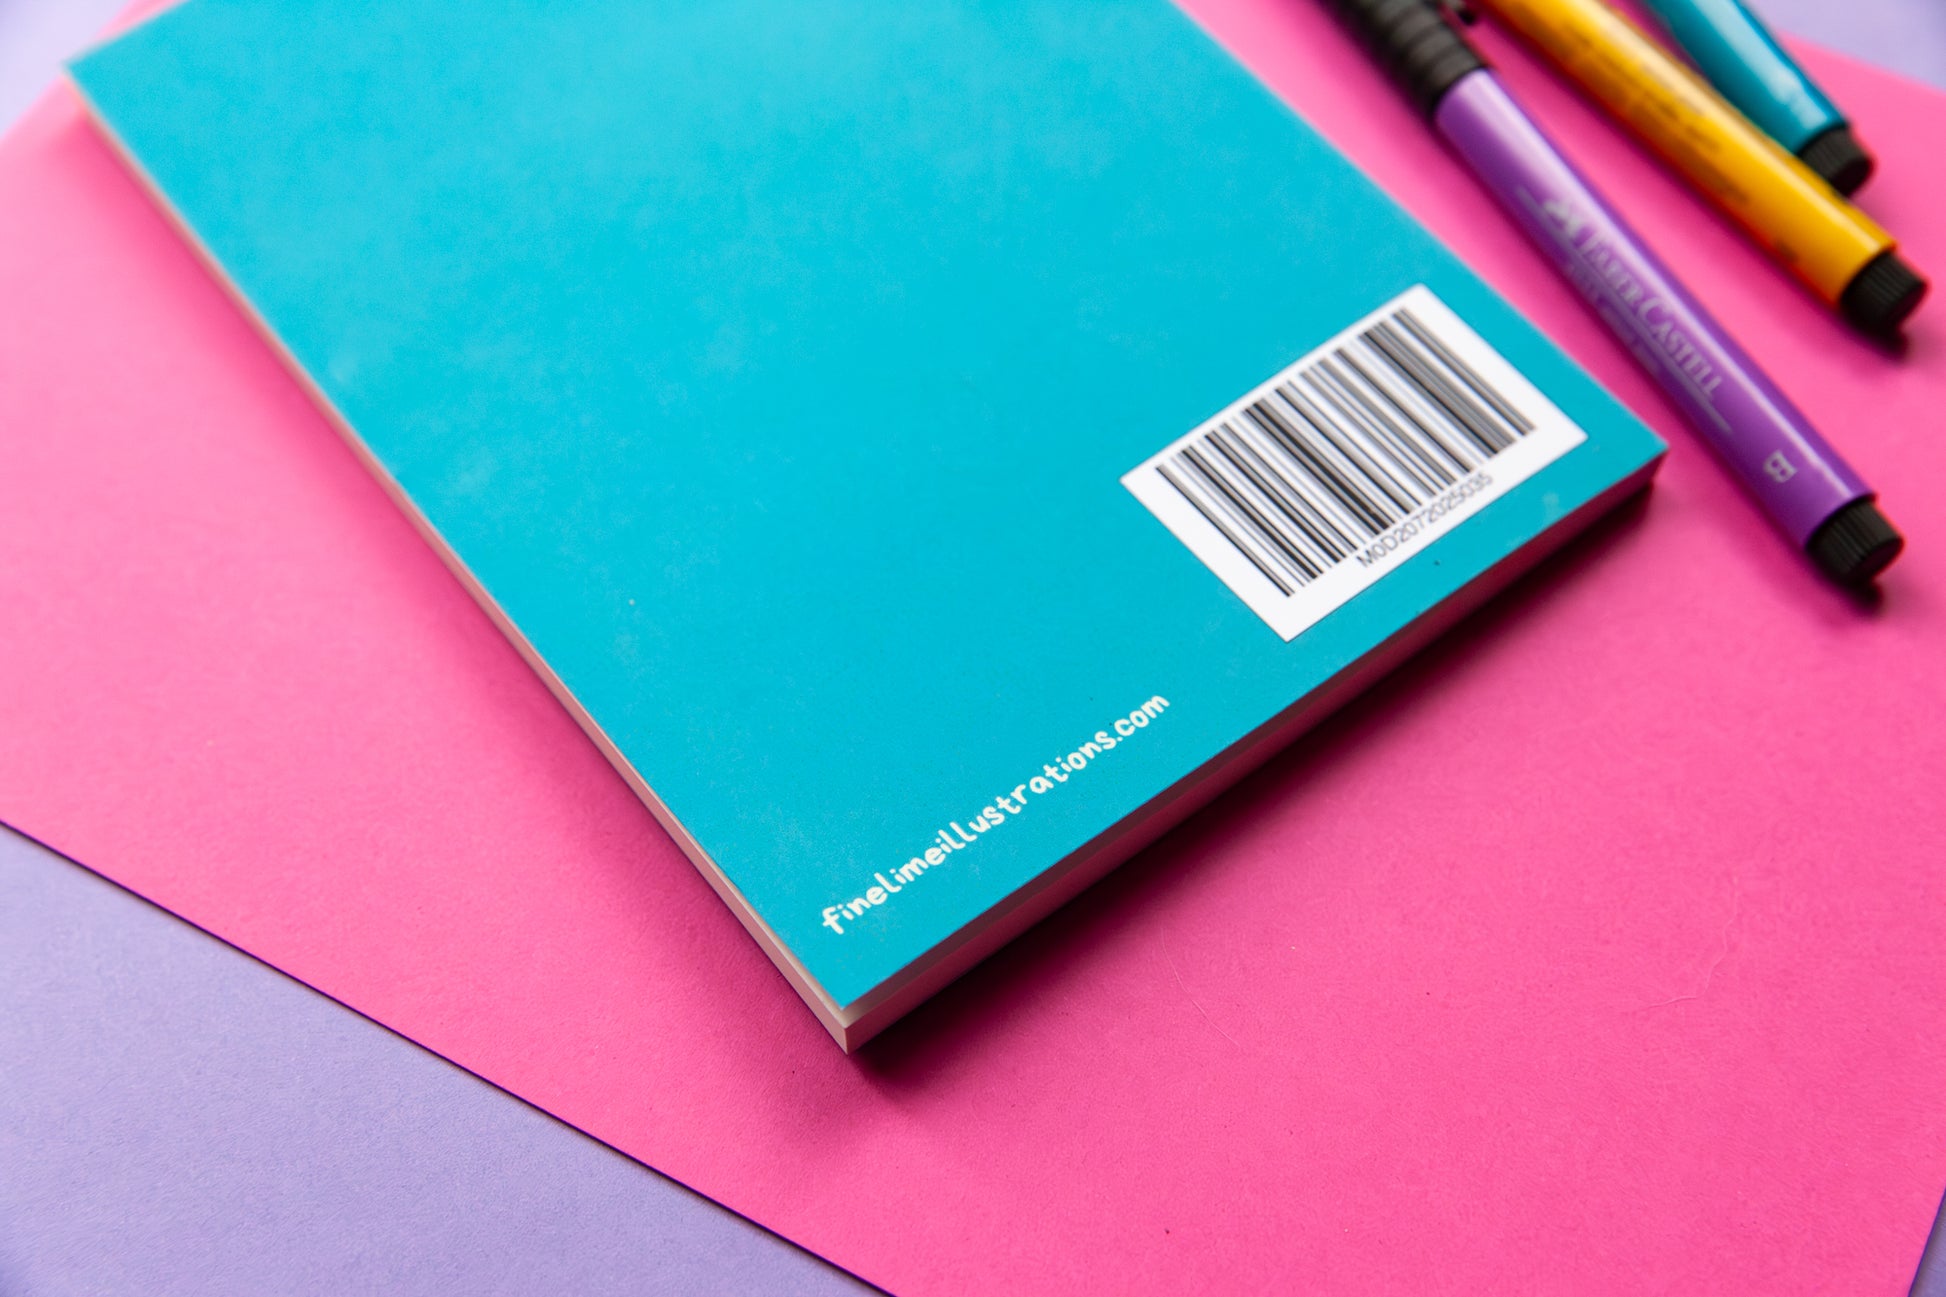 The back cover of a teal notebook showing the bar code and the company website information